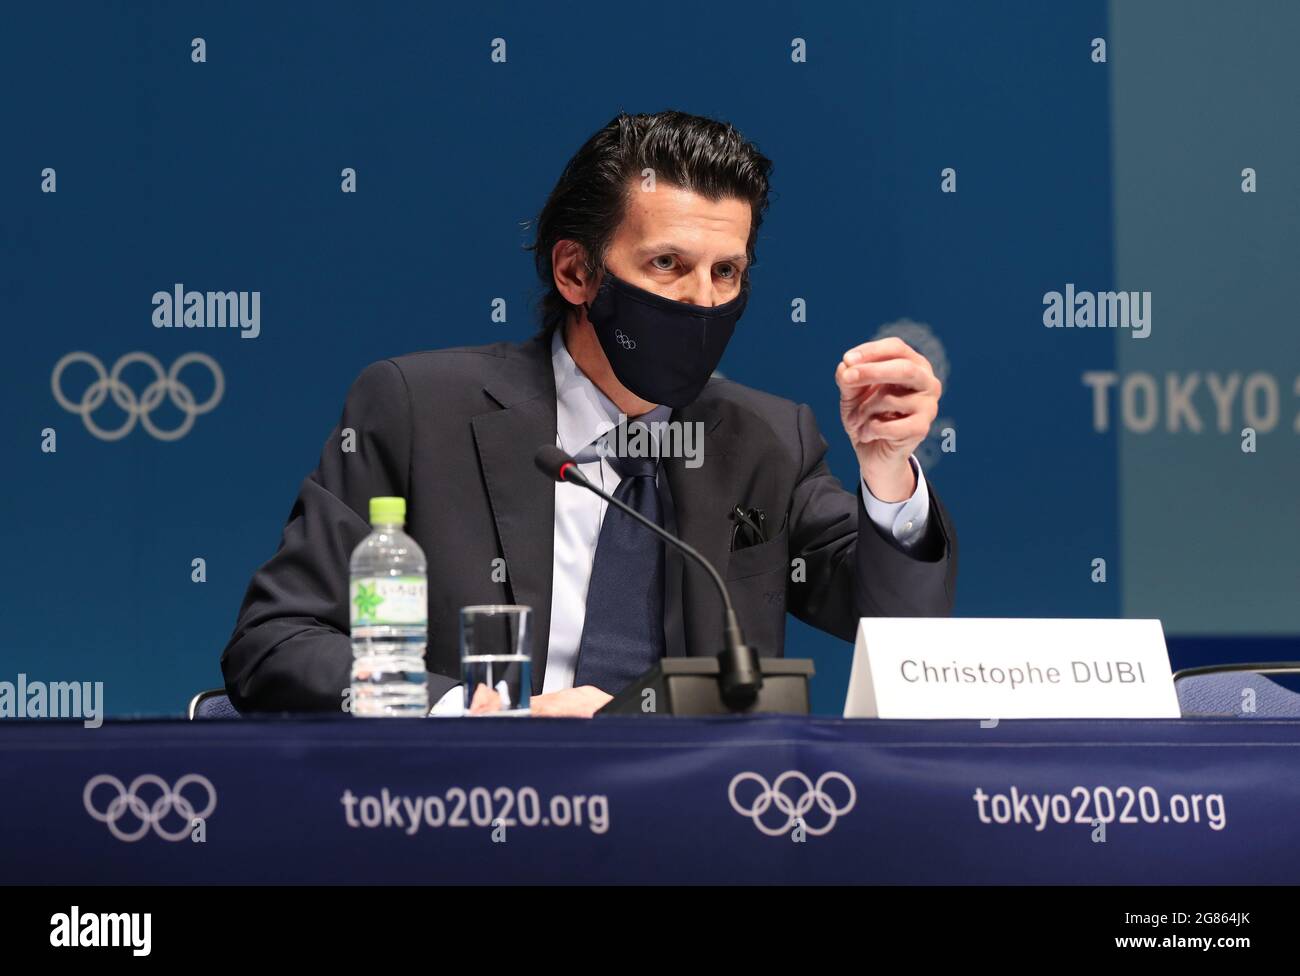 Tokyo, Japan. 17th July, 2021. International Olympic Committee (IOC) Olympic Games Executive Director Christophe Dubi answers questions during an IOC Executive Board Briefing at the Main Press Center (MPC) of Tokyo 2020 in Tokyo, Japan, July 17, 2021. Credit: Ding Xu/Xinhua/Alamy Live News Stock Photo